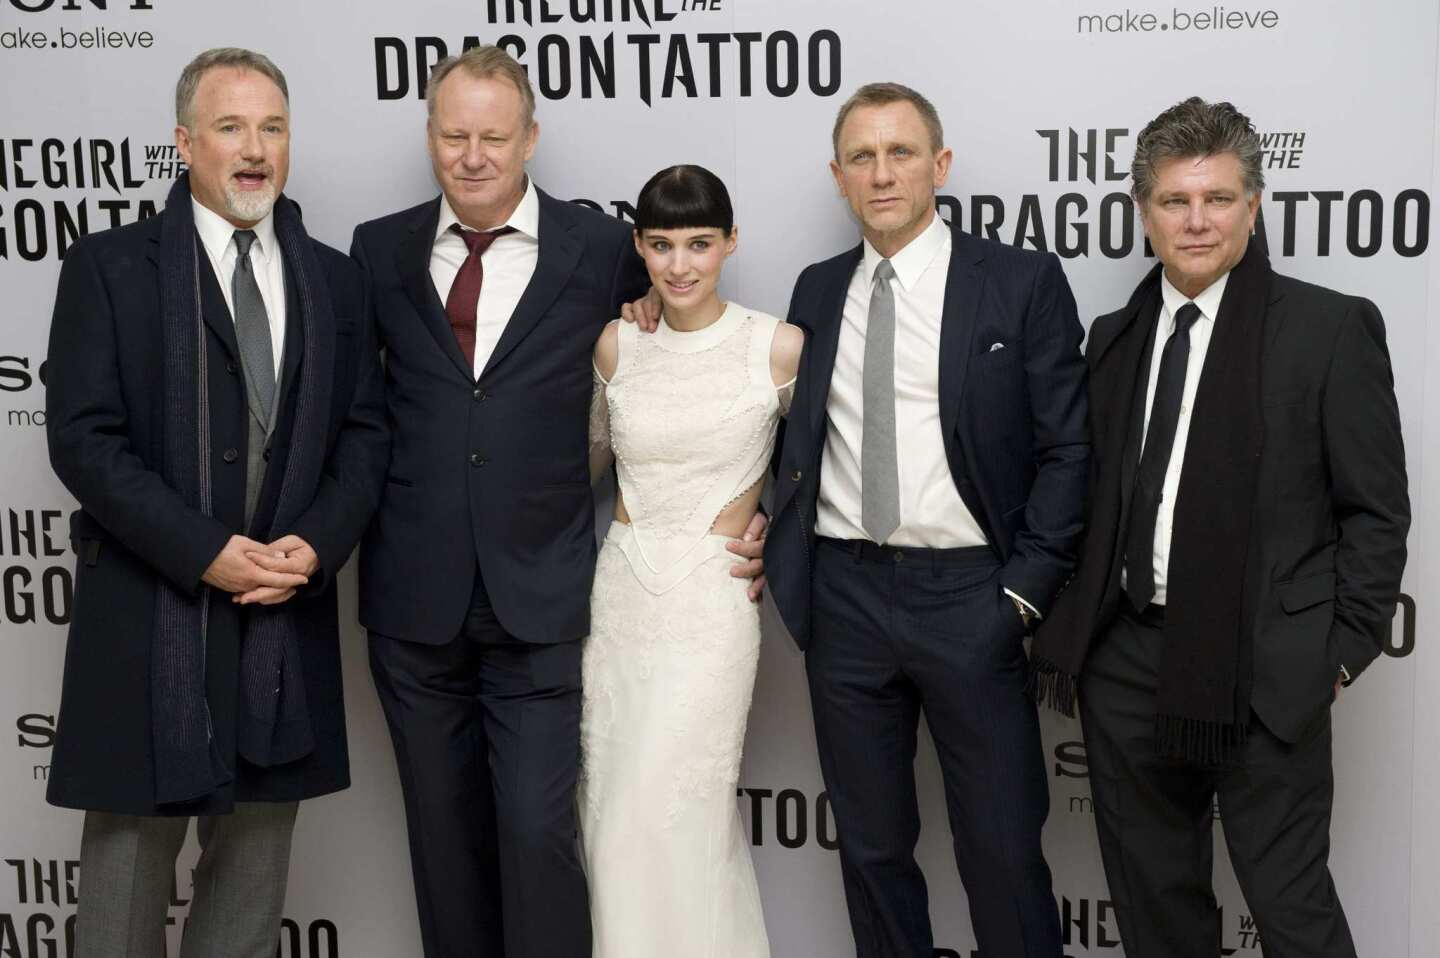 'The Girl With the Dragon Tattoo' premiere